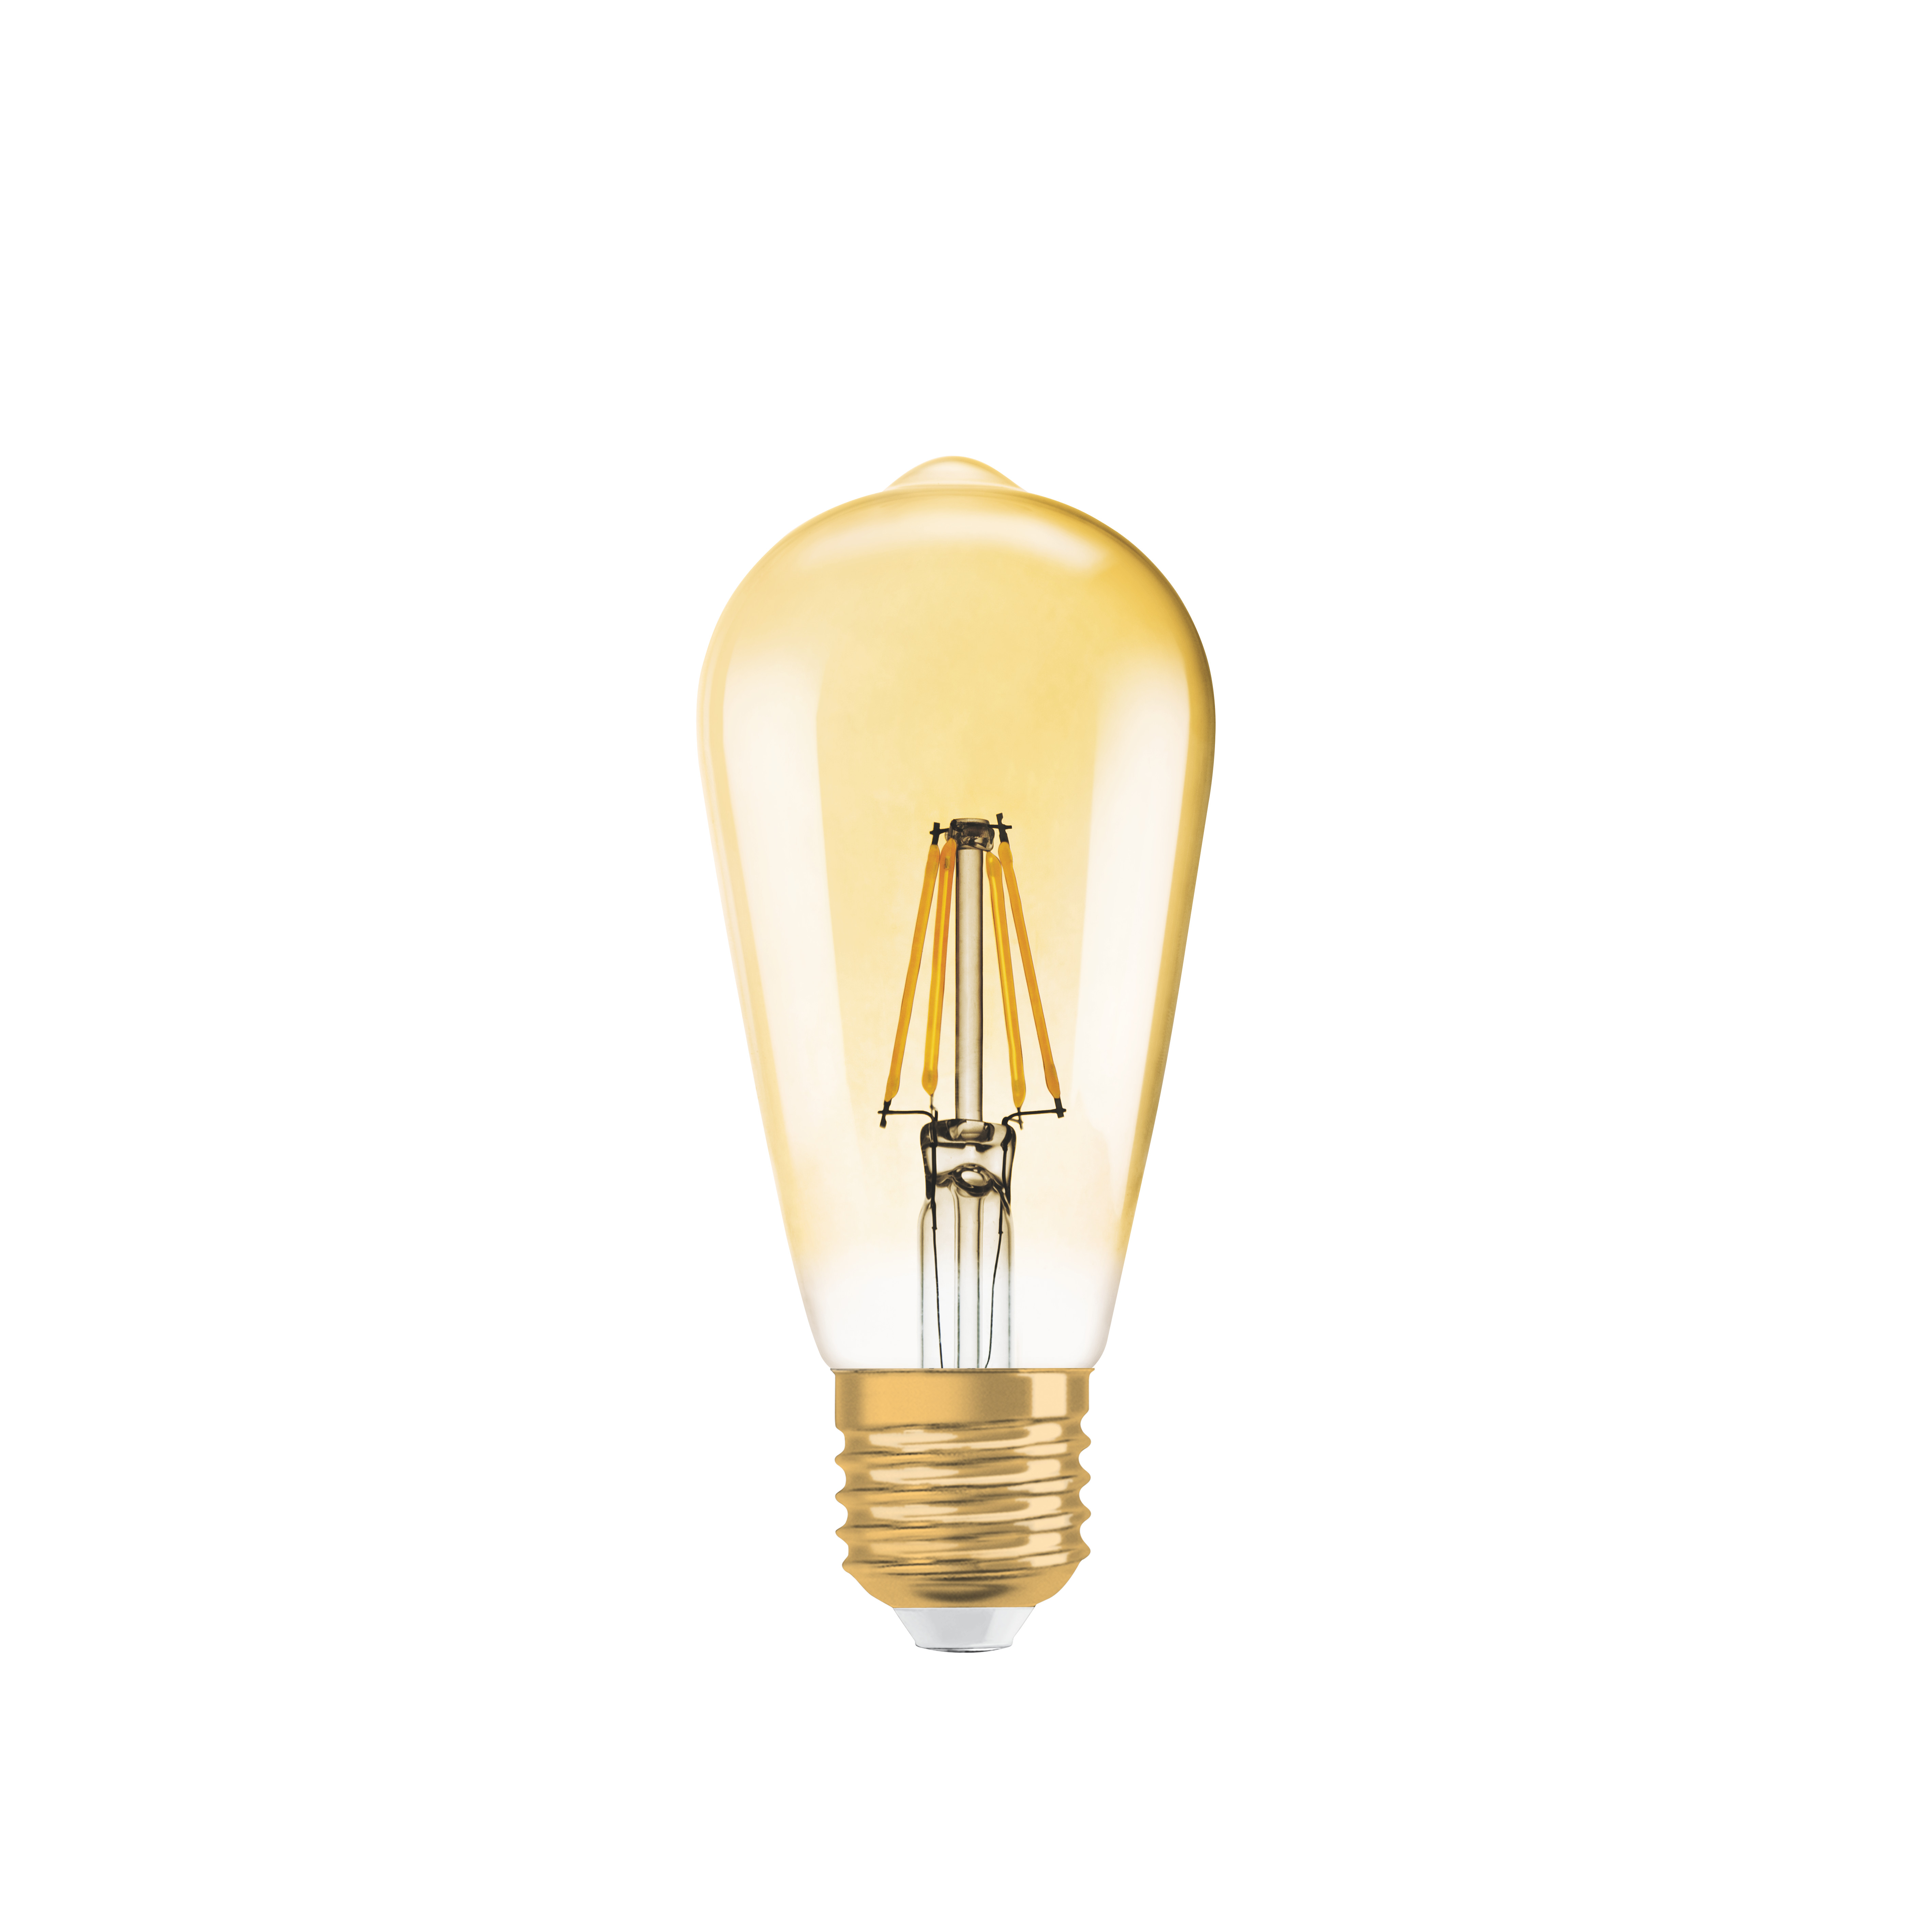 Lampe Led 1906 Vintage E27 725lm 7,5w Blanc Chaud Dimmable